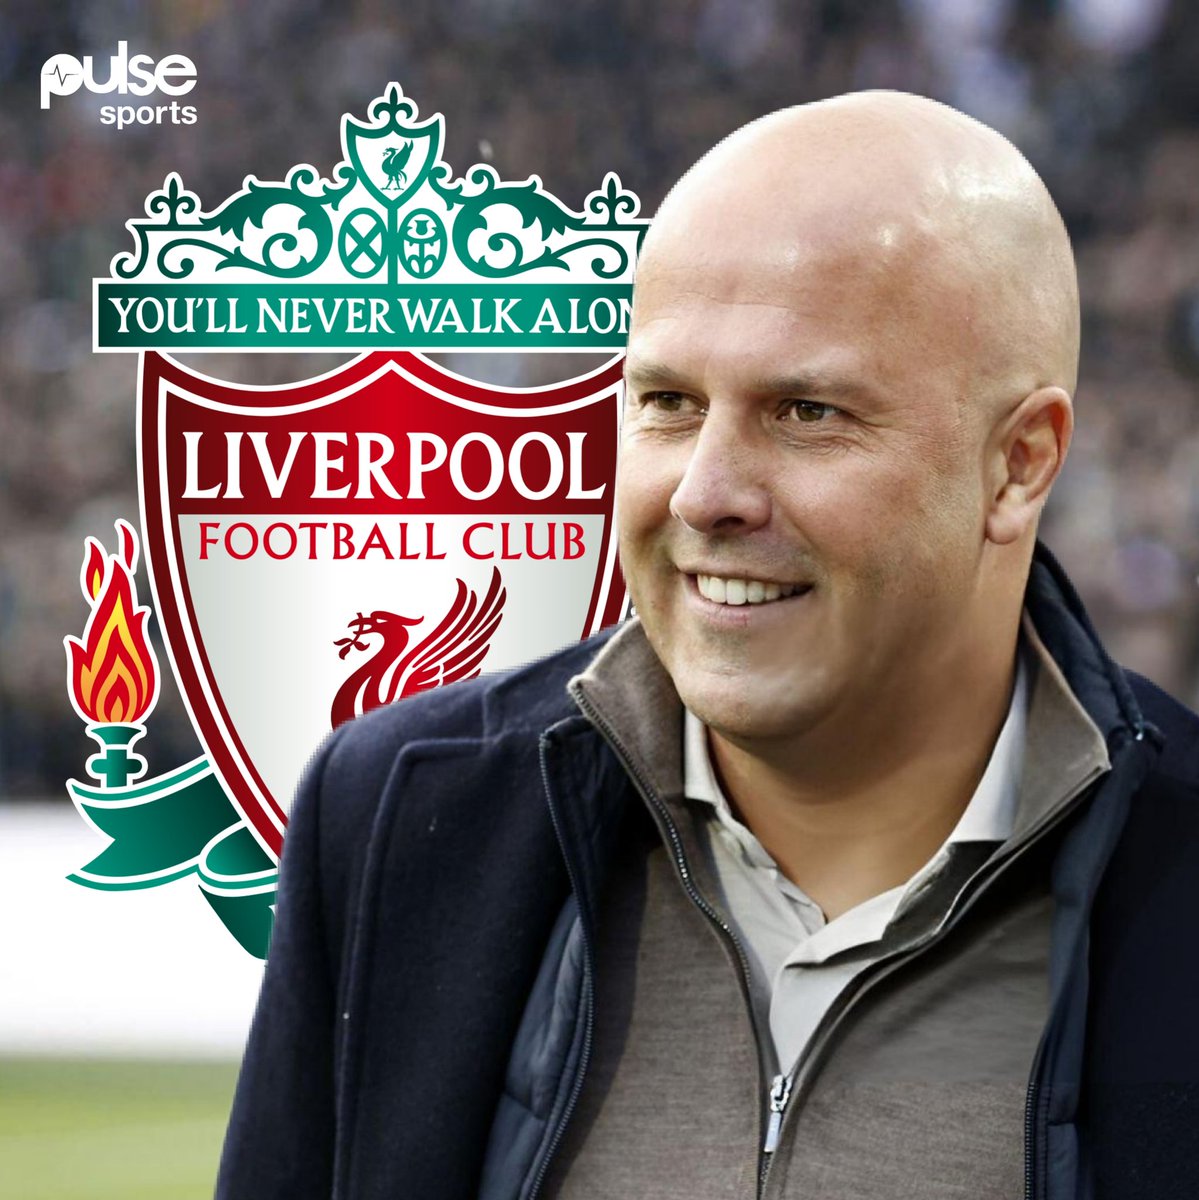 🚨 𝐃𝐎𝐍𝐄 𝐃𝐄𝐀𝐋: Arne Slot is set to take over as the new head coach of Liverpool, succeeding Jurgen Klopp at the end of the season. 👨‍💼 The agreement includes compensation between Feyenoord and Liverpool, totaling around €13/15m. What's your opinion on his appointment?…